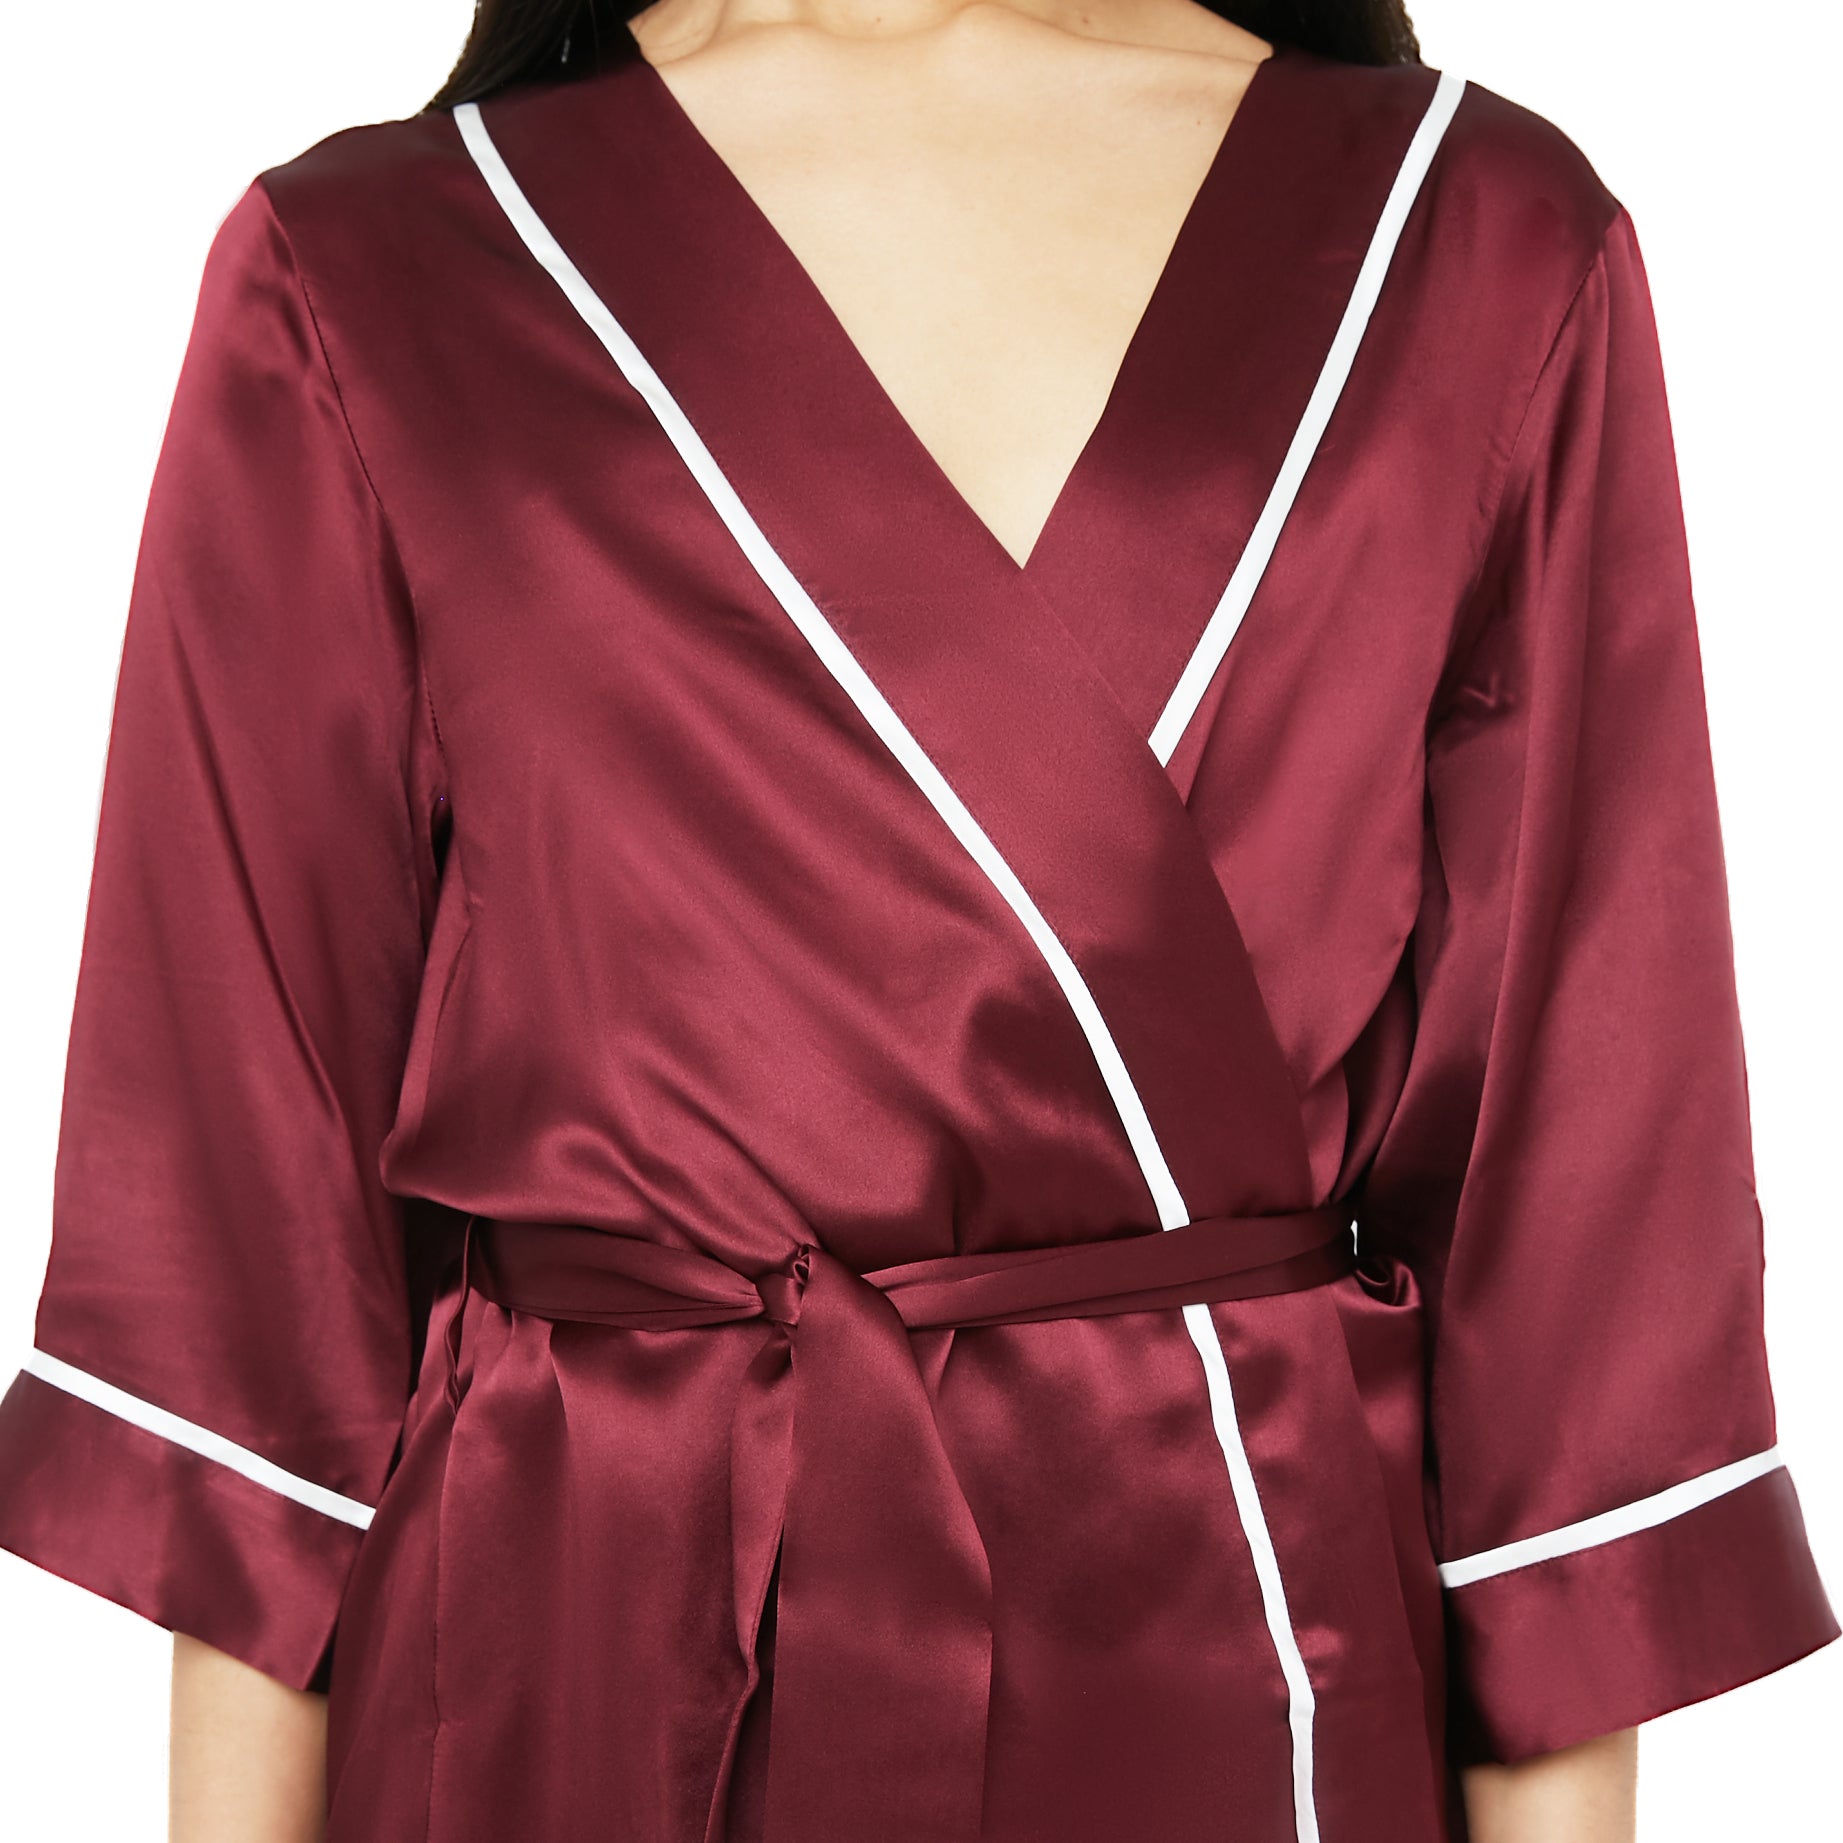 Classic Silk Kimono Styled Robe with Contrast Piping (22 Momme) - MYK Silk #style_kimono style #color_burgundy